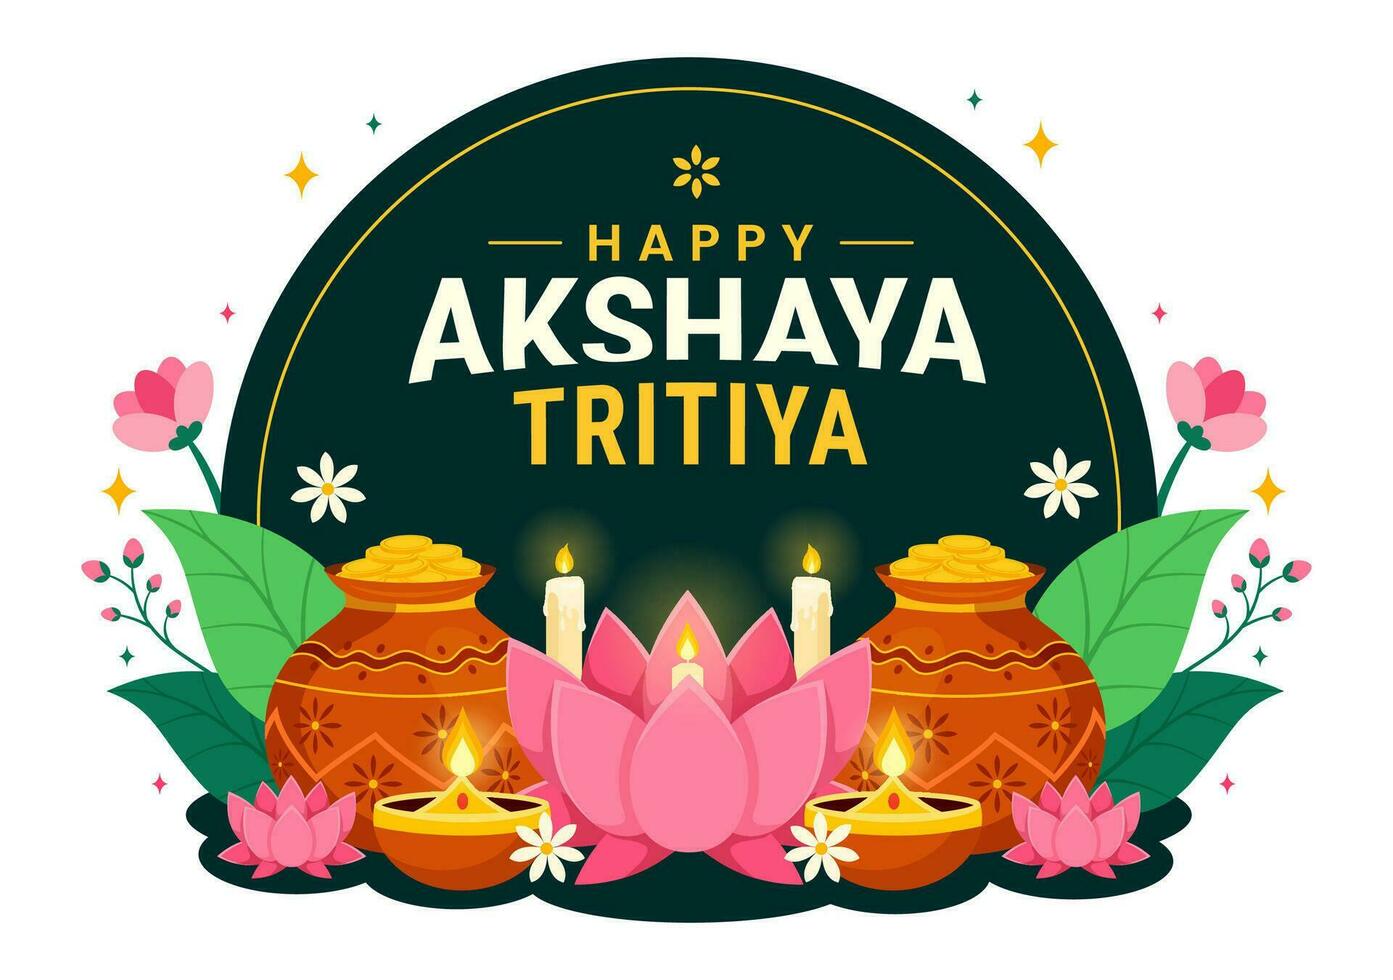 Akshaya Tritiya Festival Vector Illustration with a Golden Kalash, Candle, Pot and Gold Coins for Dhanteras Celebration in Traditional Hindu Holiday